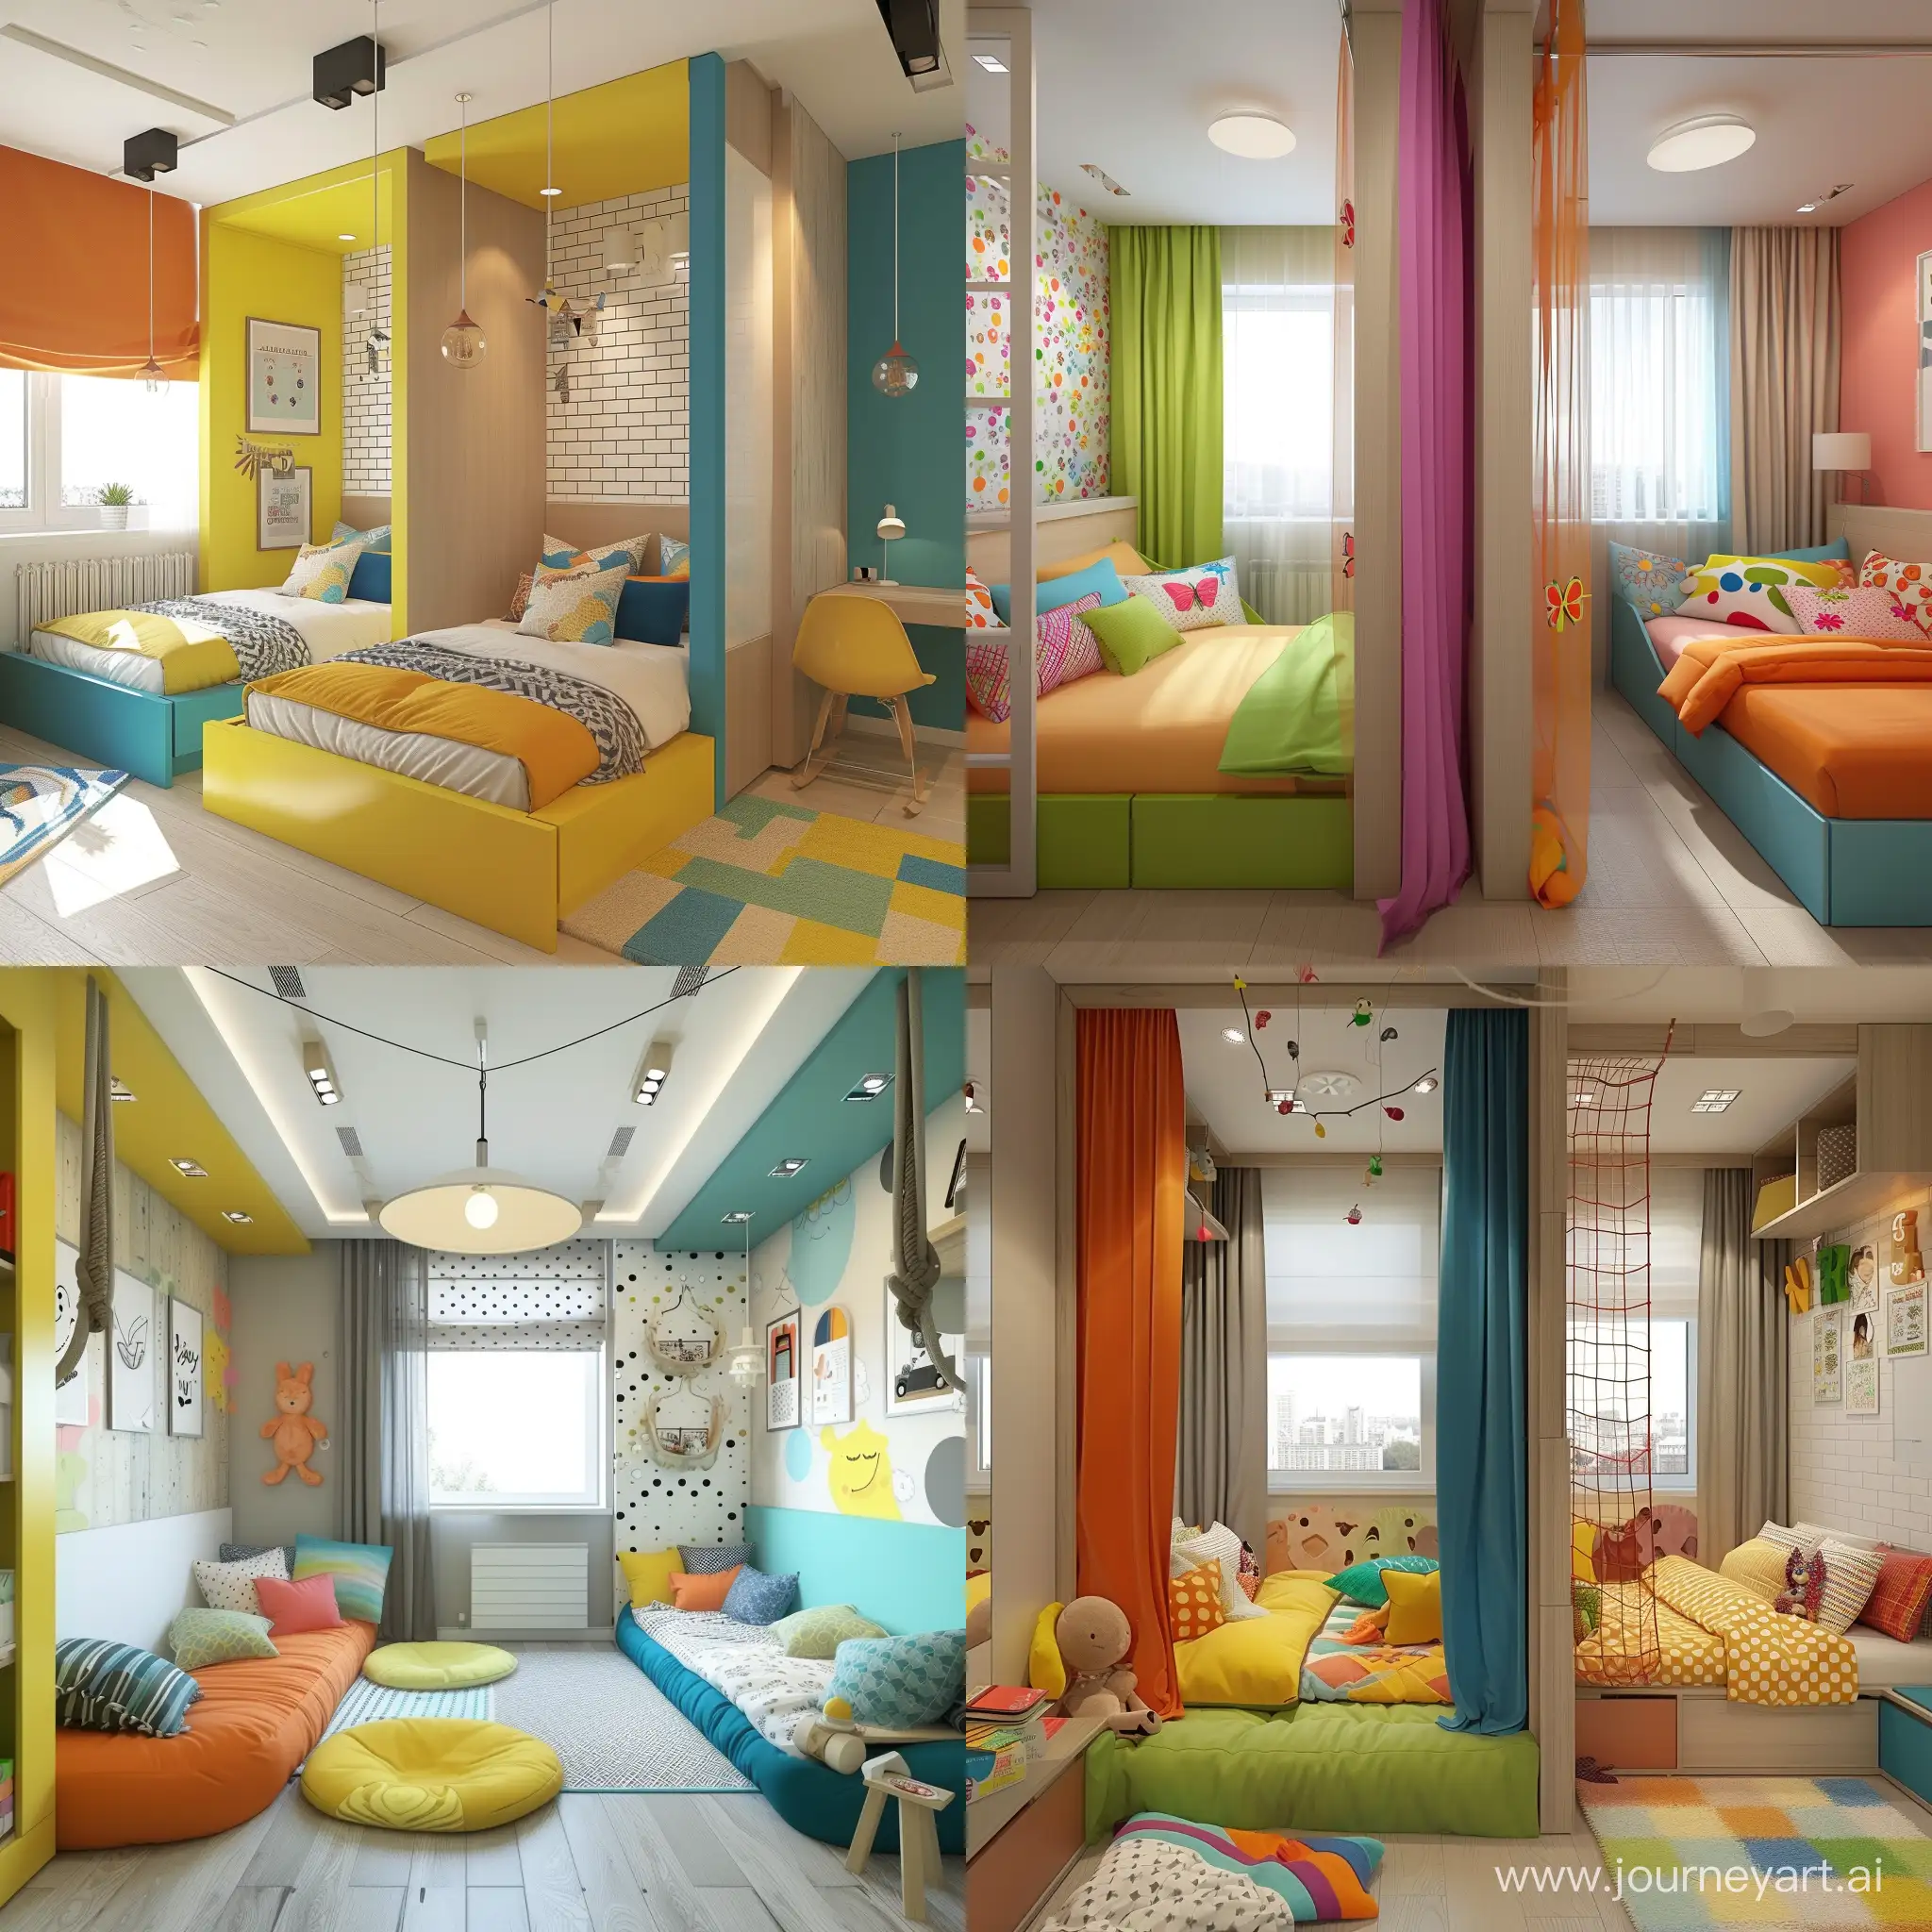 interior design of a cute children's room for two children with zoning of the room in bright colors